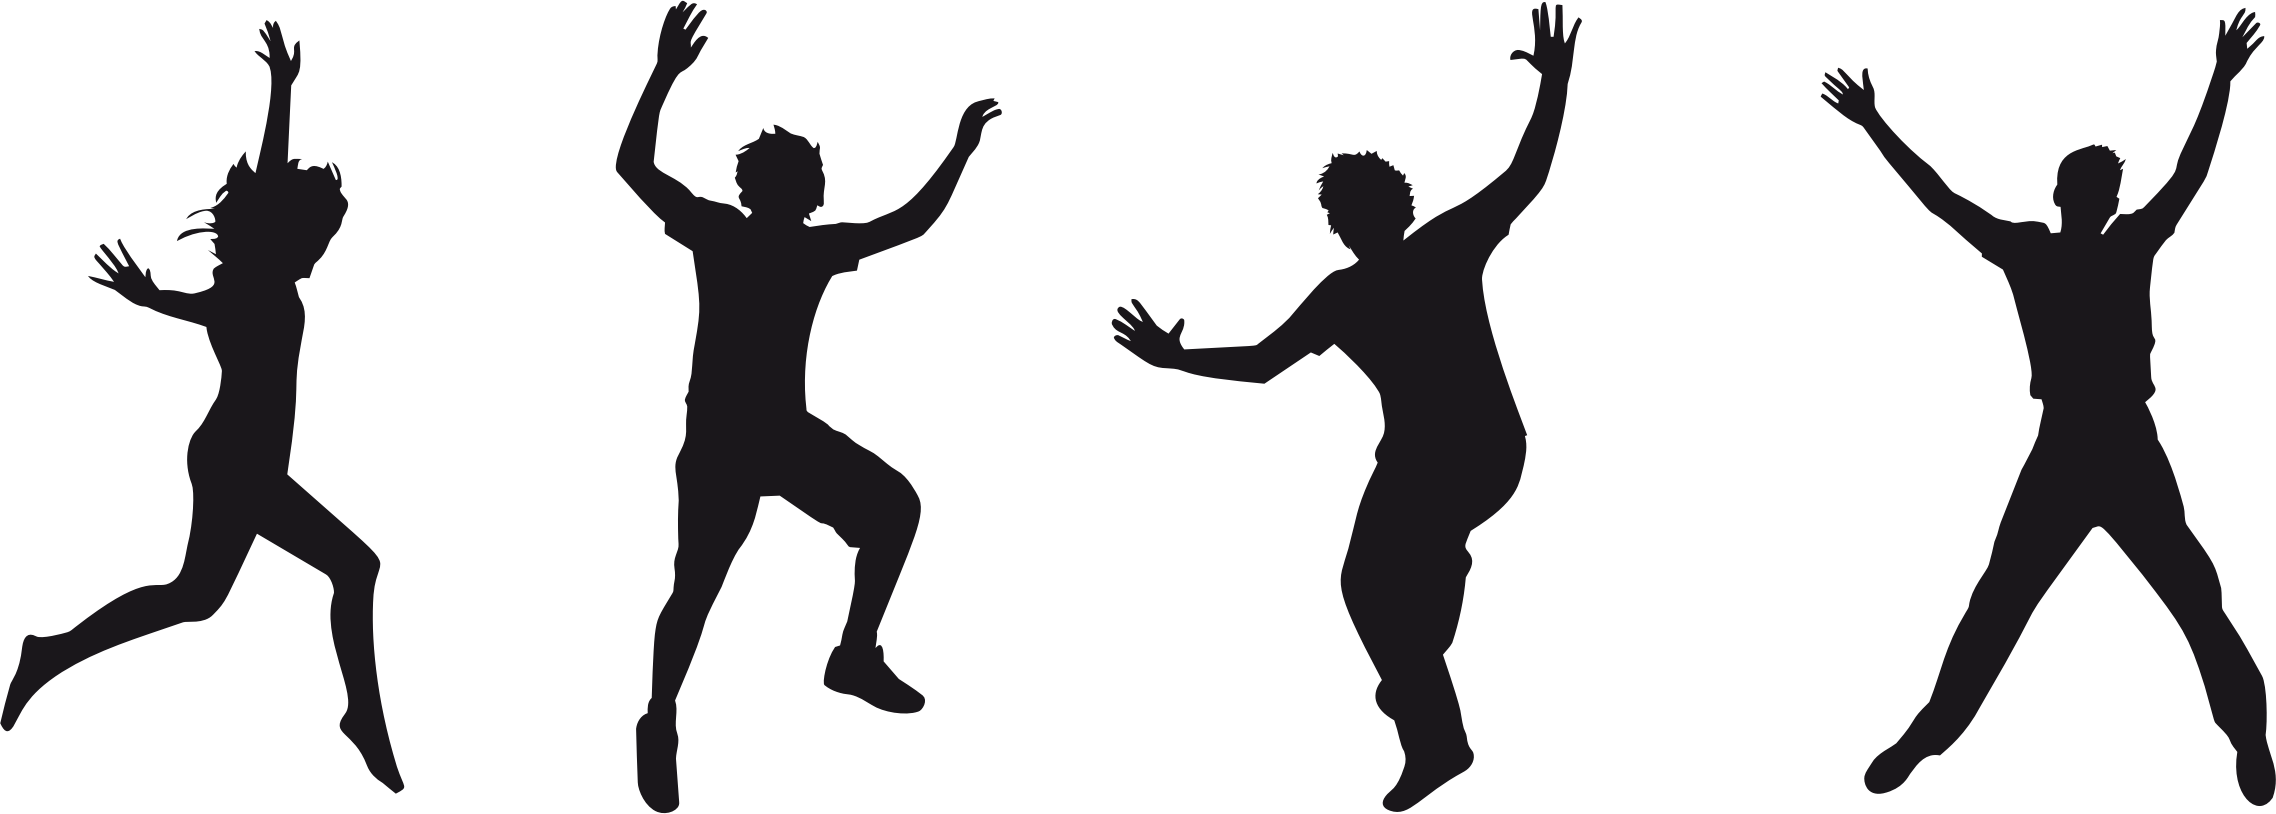 Clipart - Silhouette Of 3 People (2276x814)